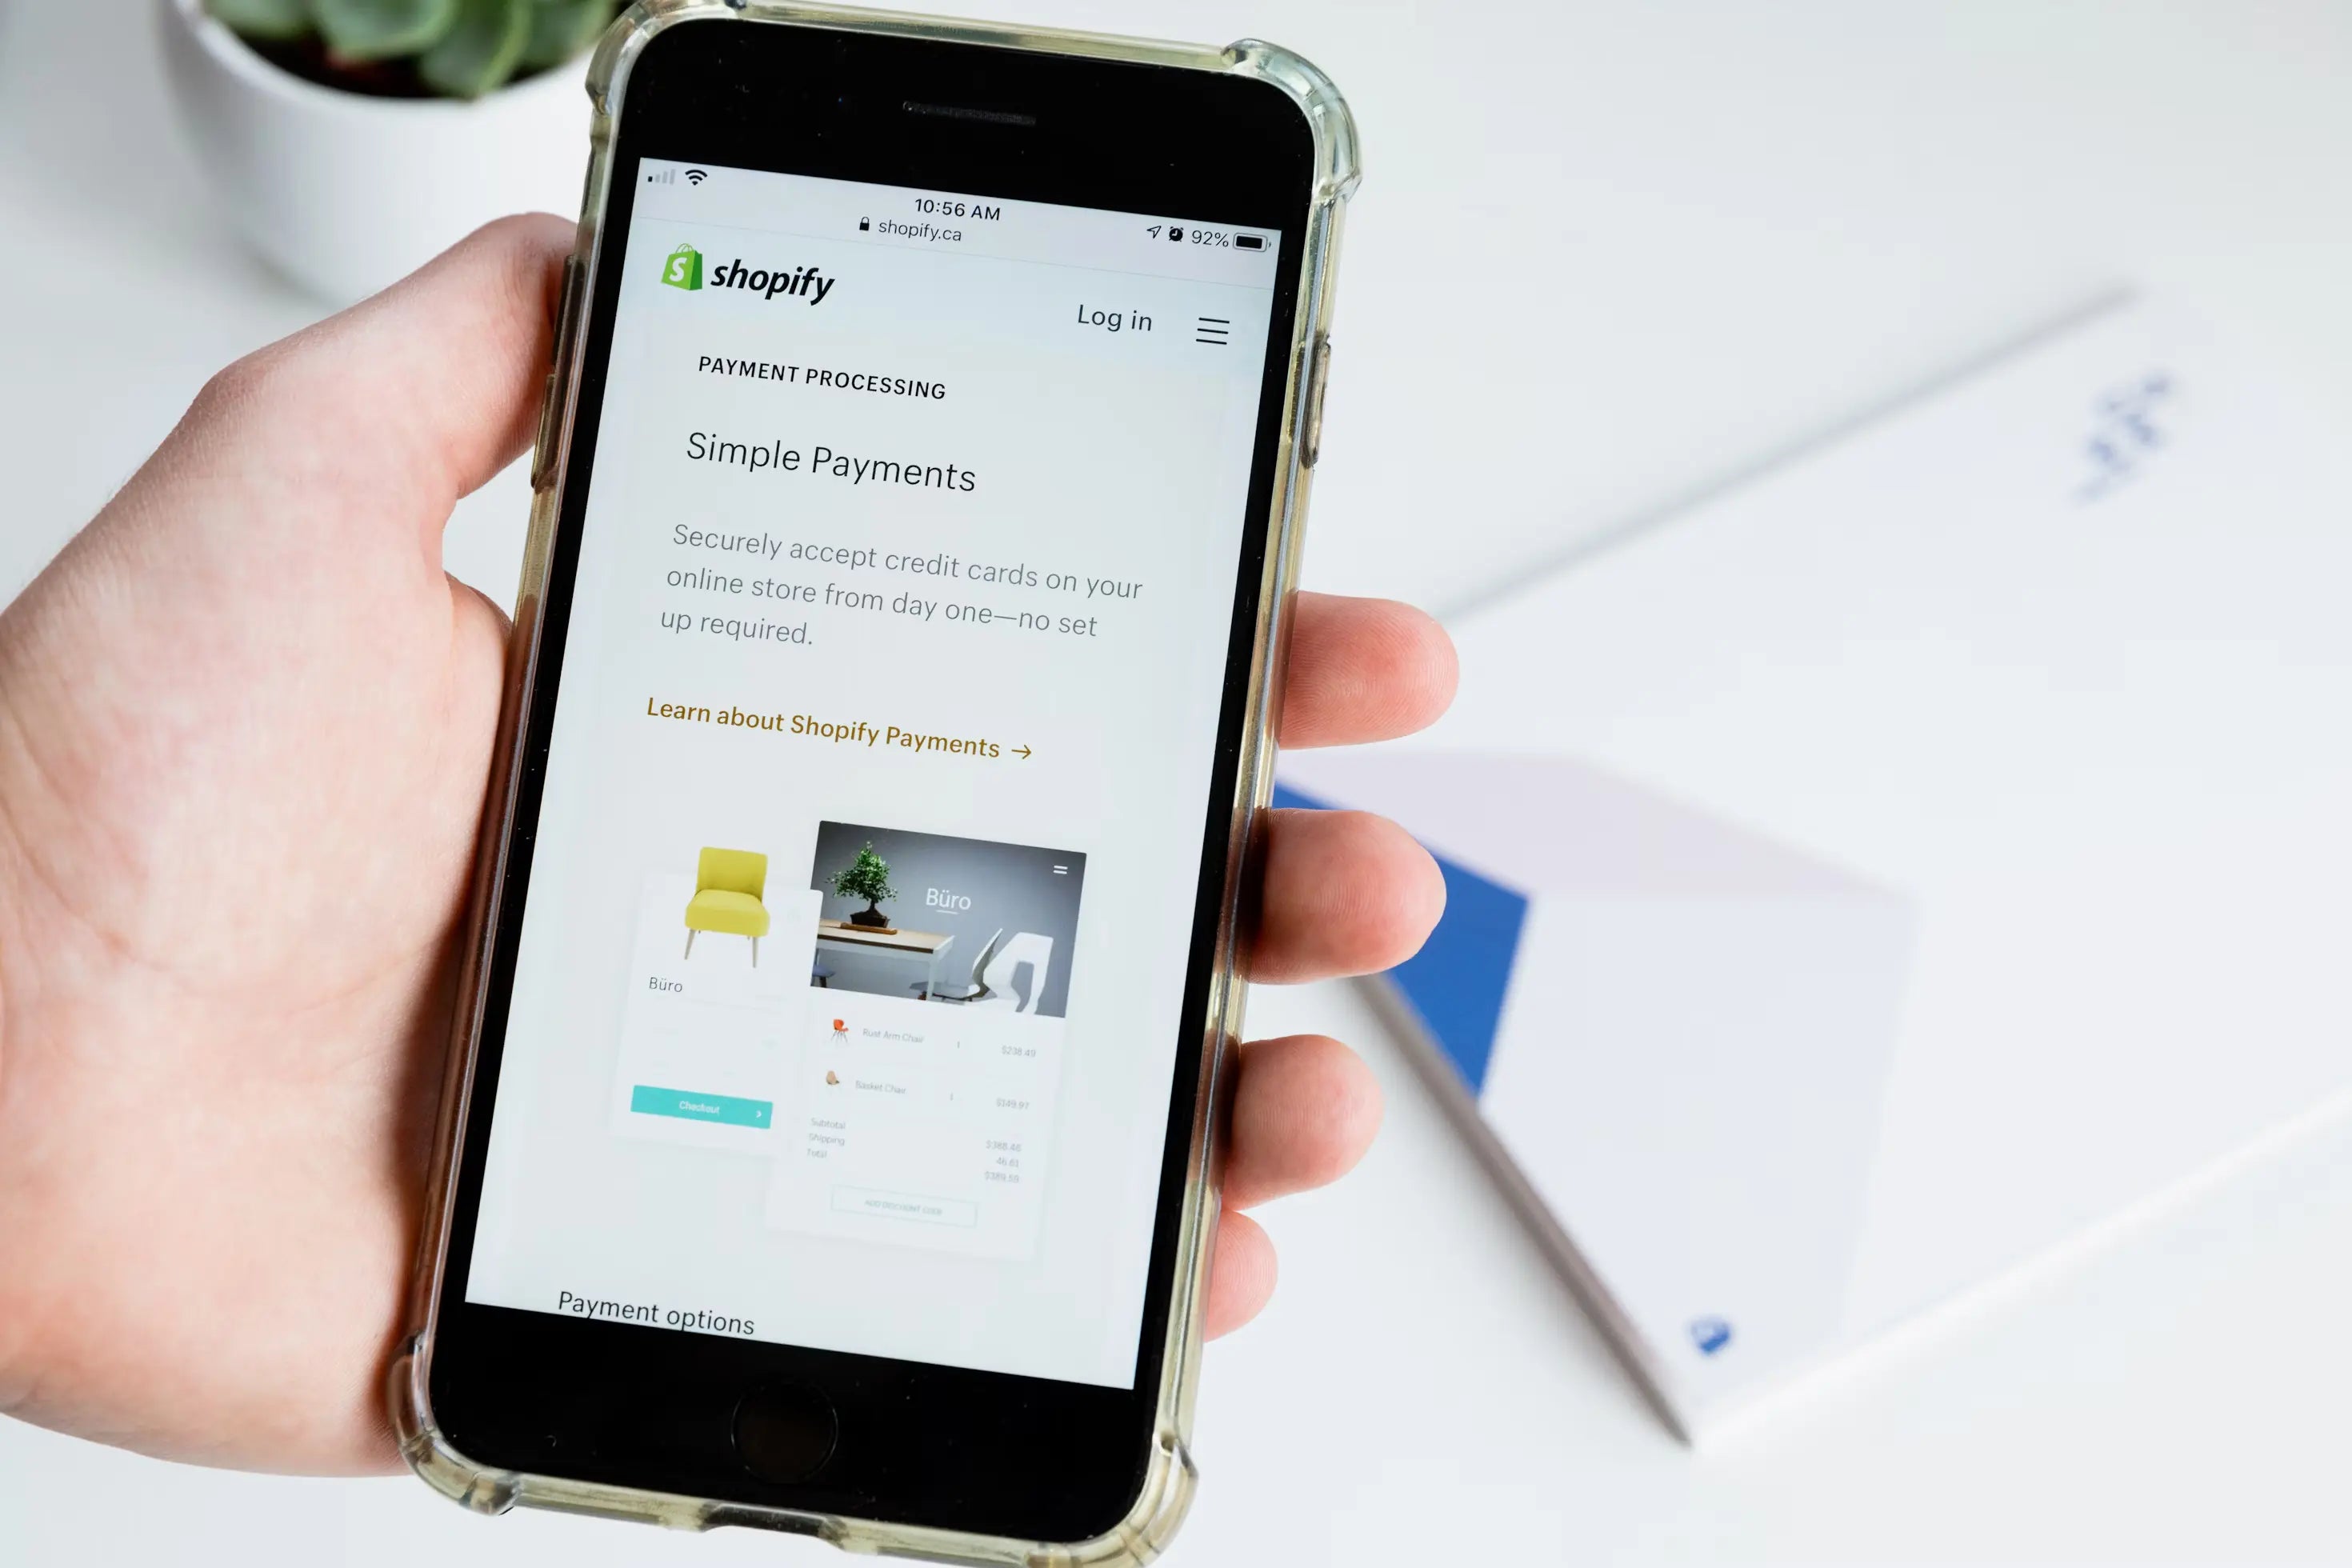 Discover apps for Shopify store let you gain insights into its functionality.